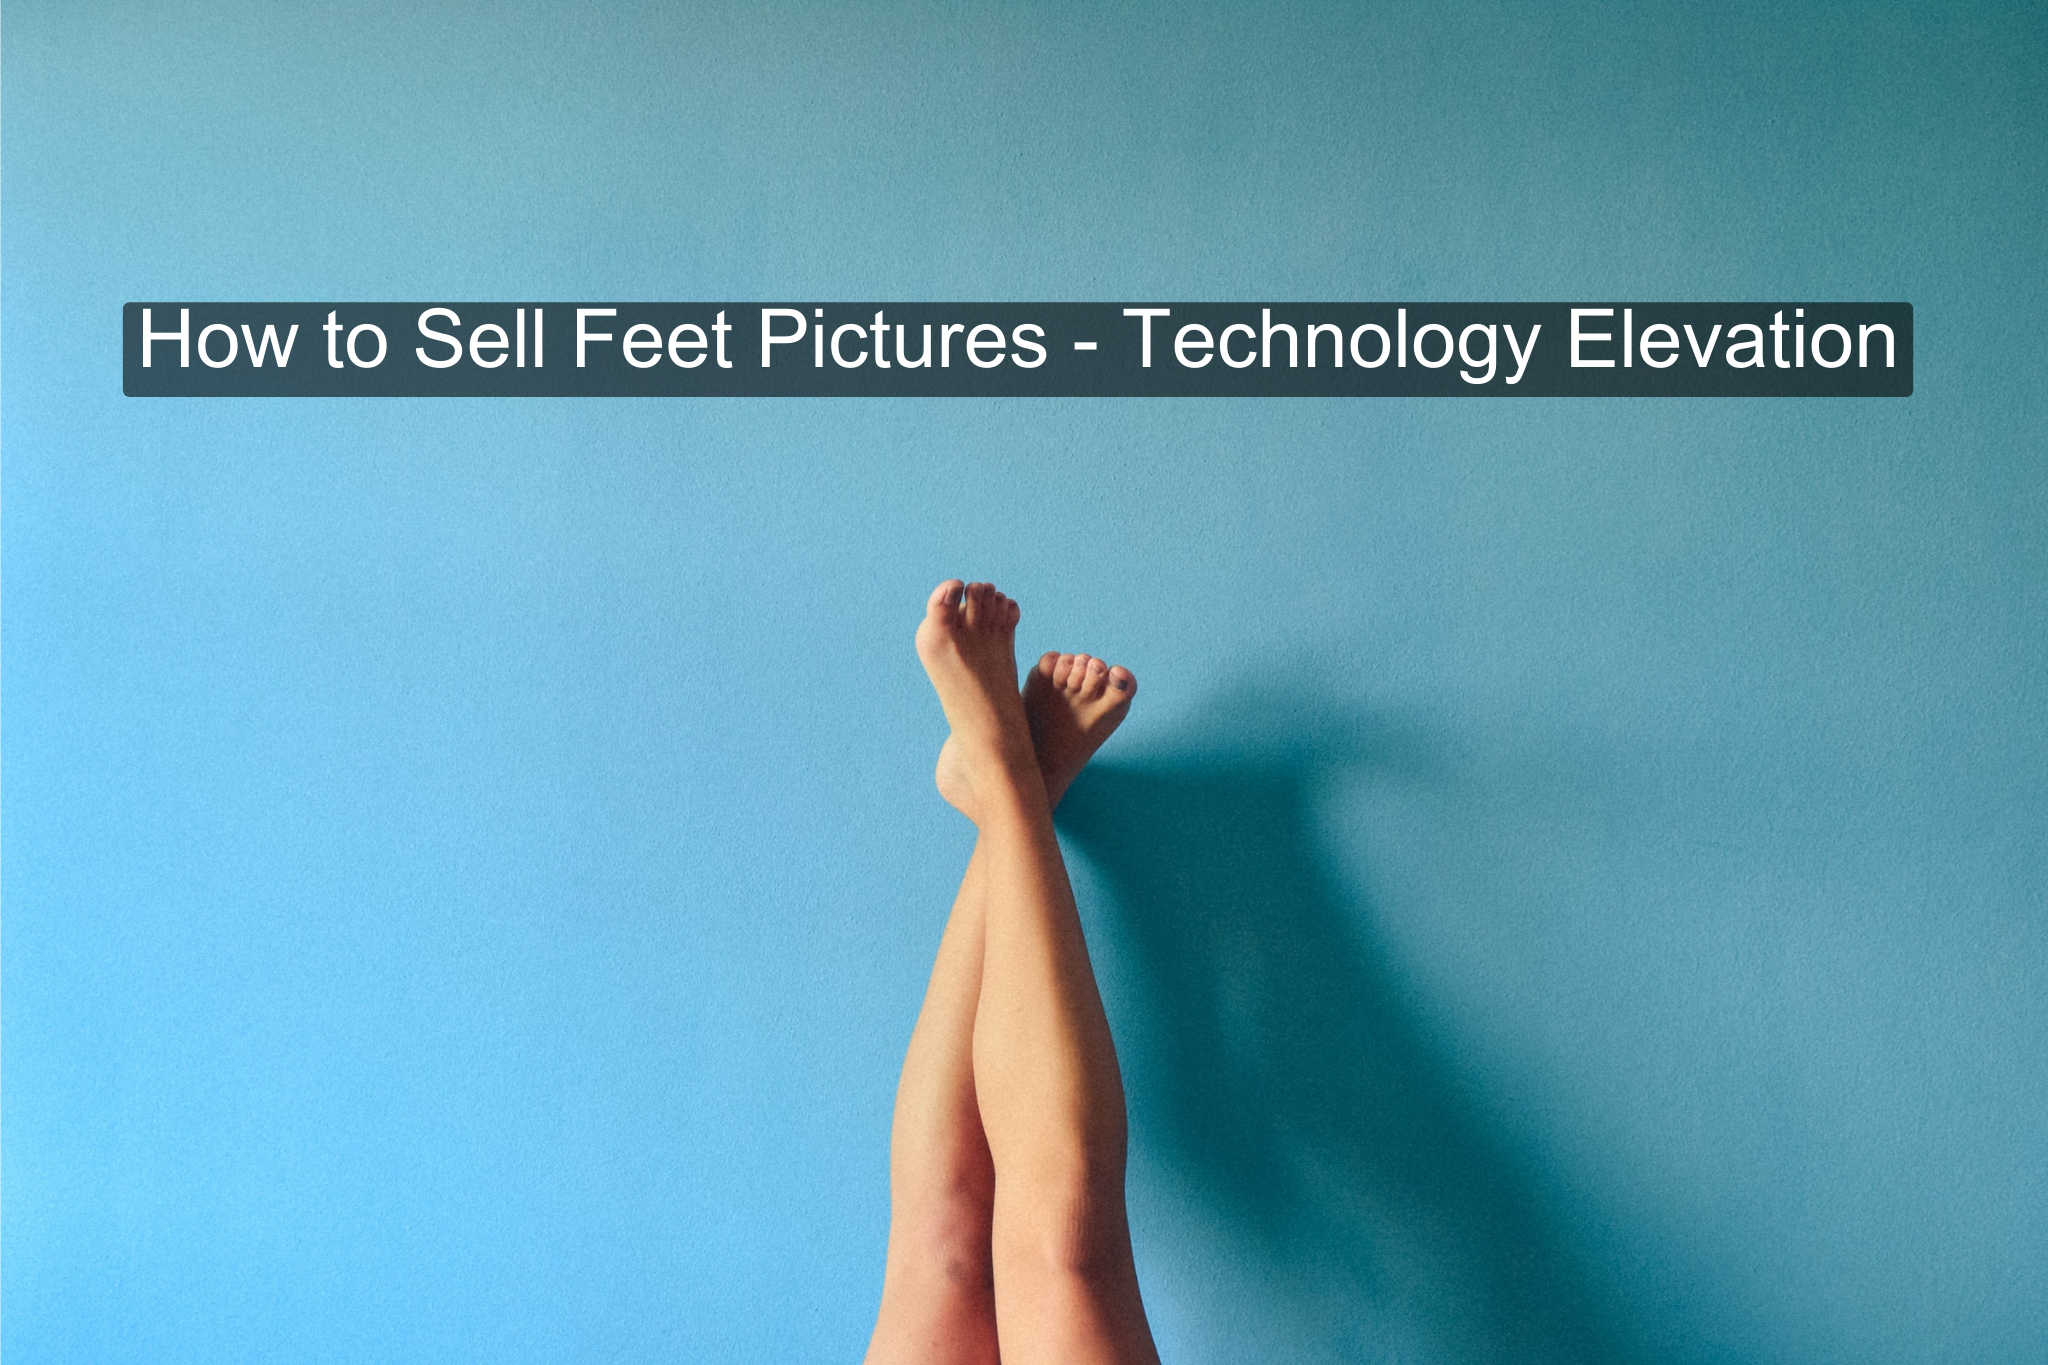 How to Sell Feet Pictures